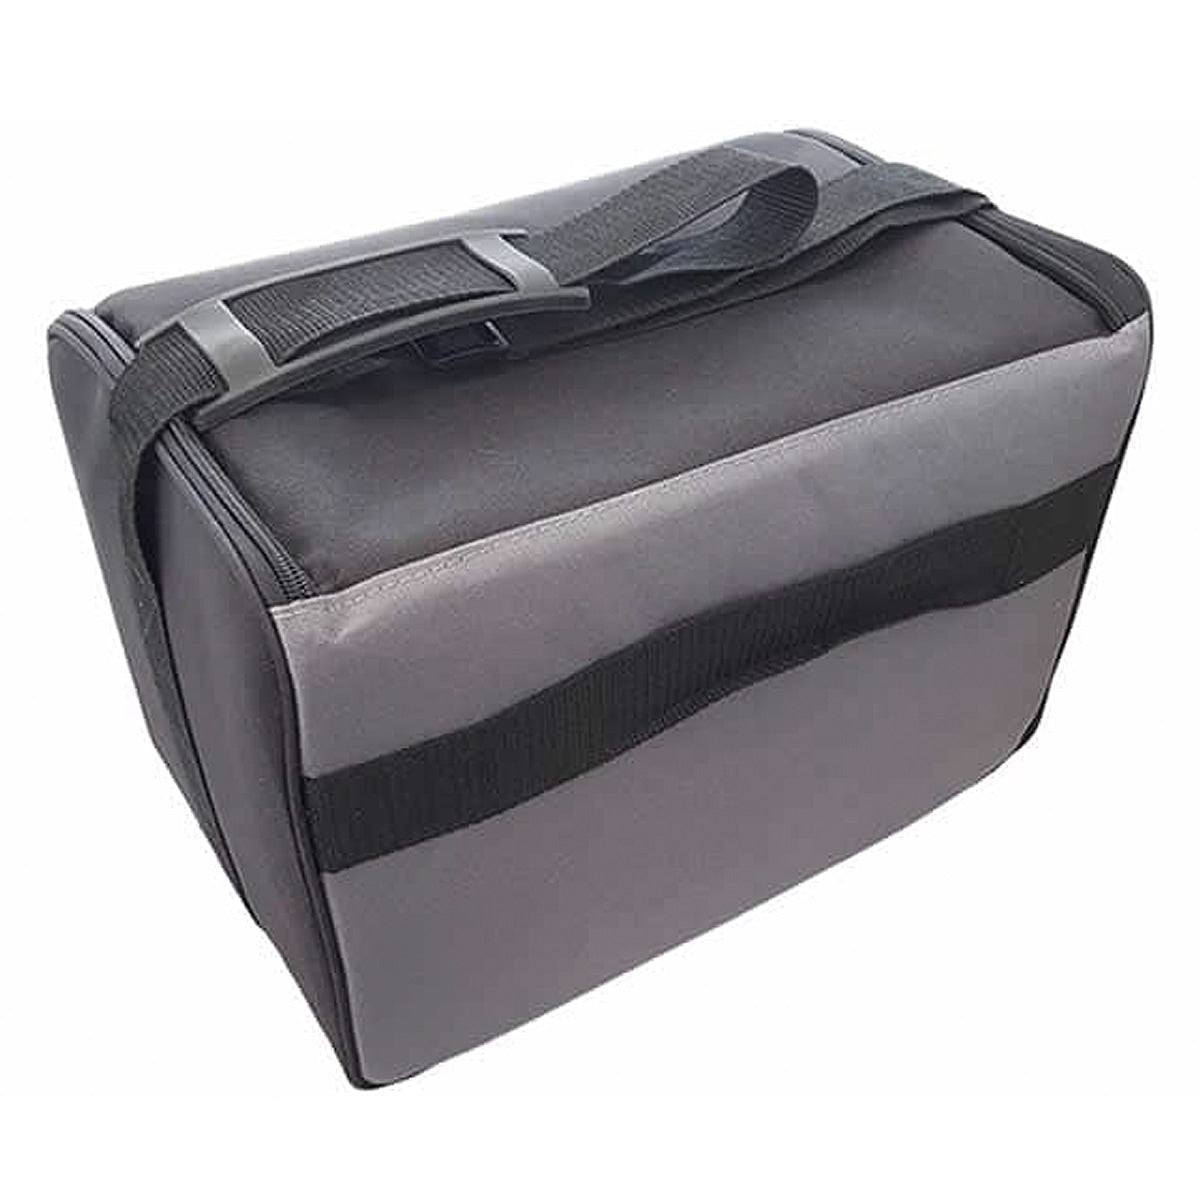 Travel Carrying Case for CPAP & BiPAP Machines